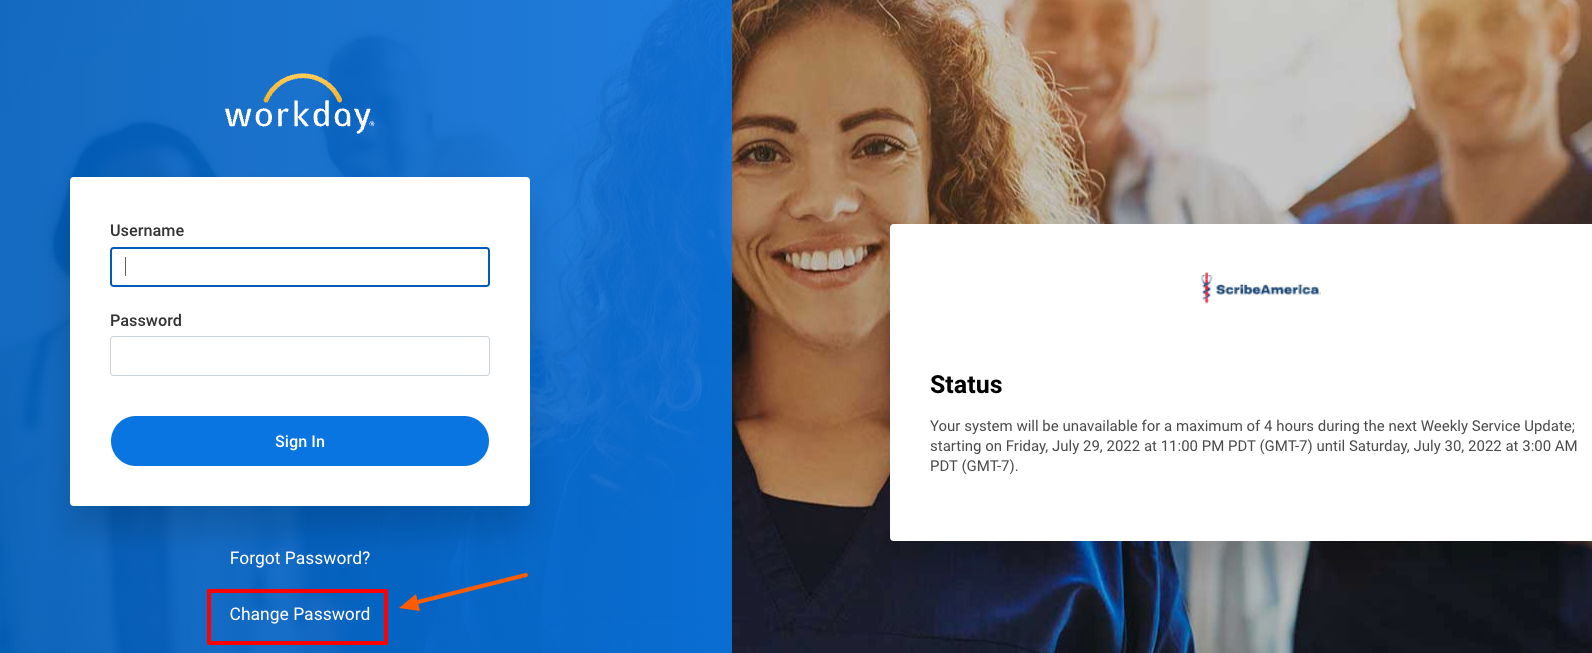 workday scribeamerica change password page